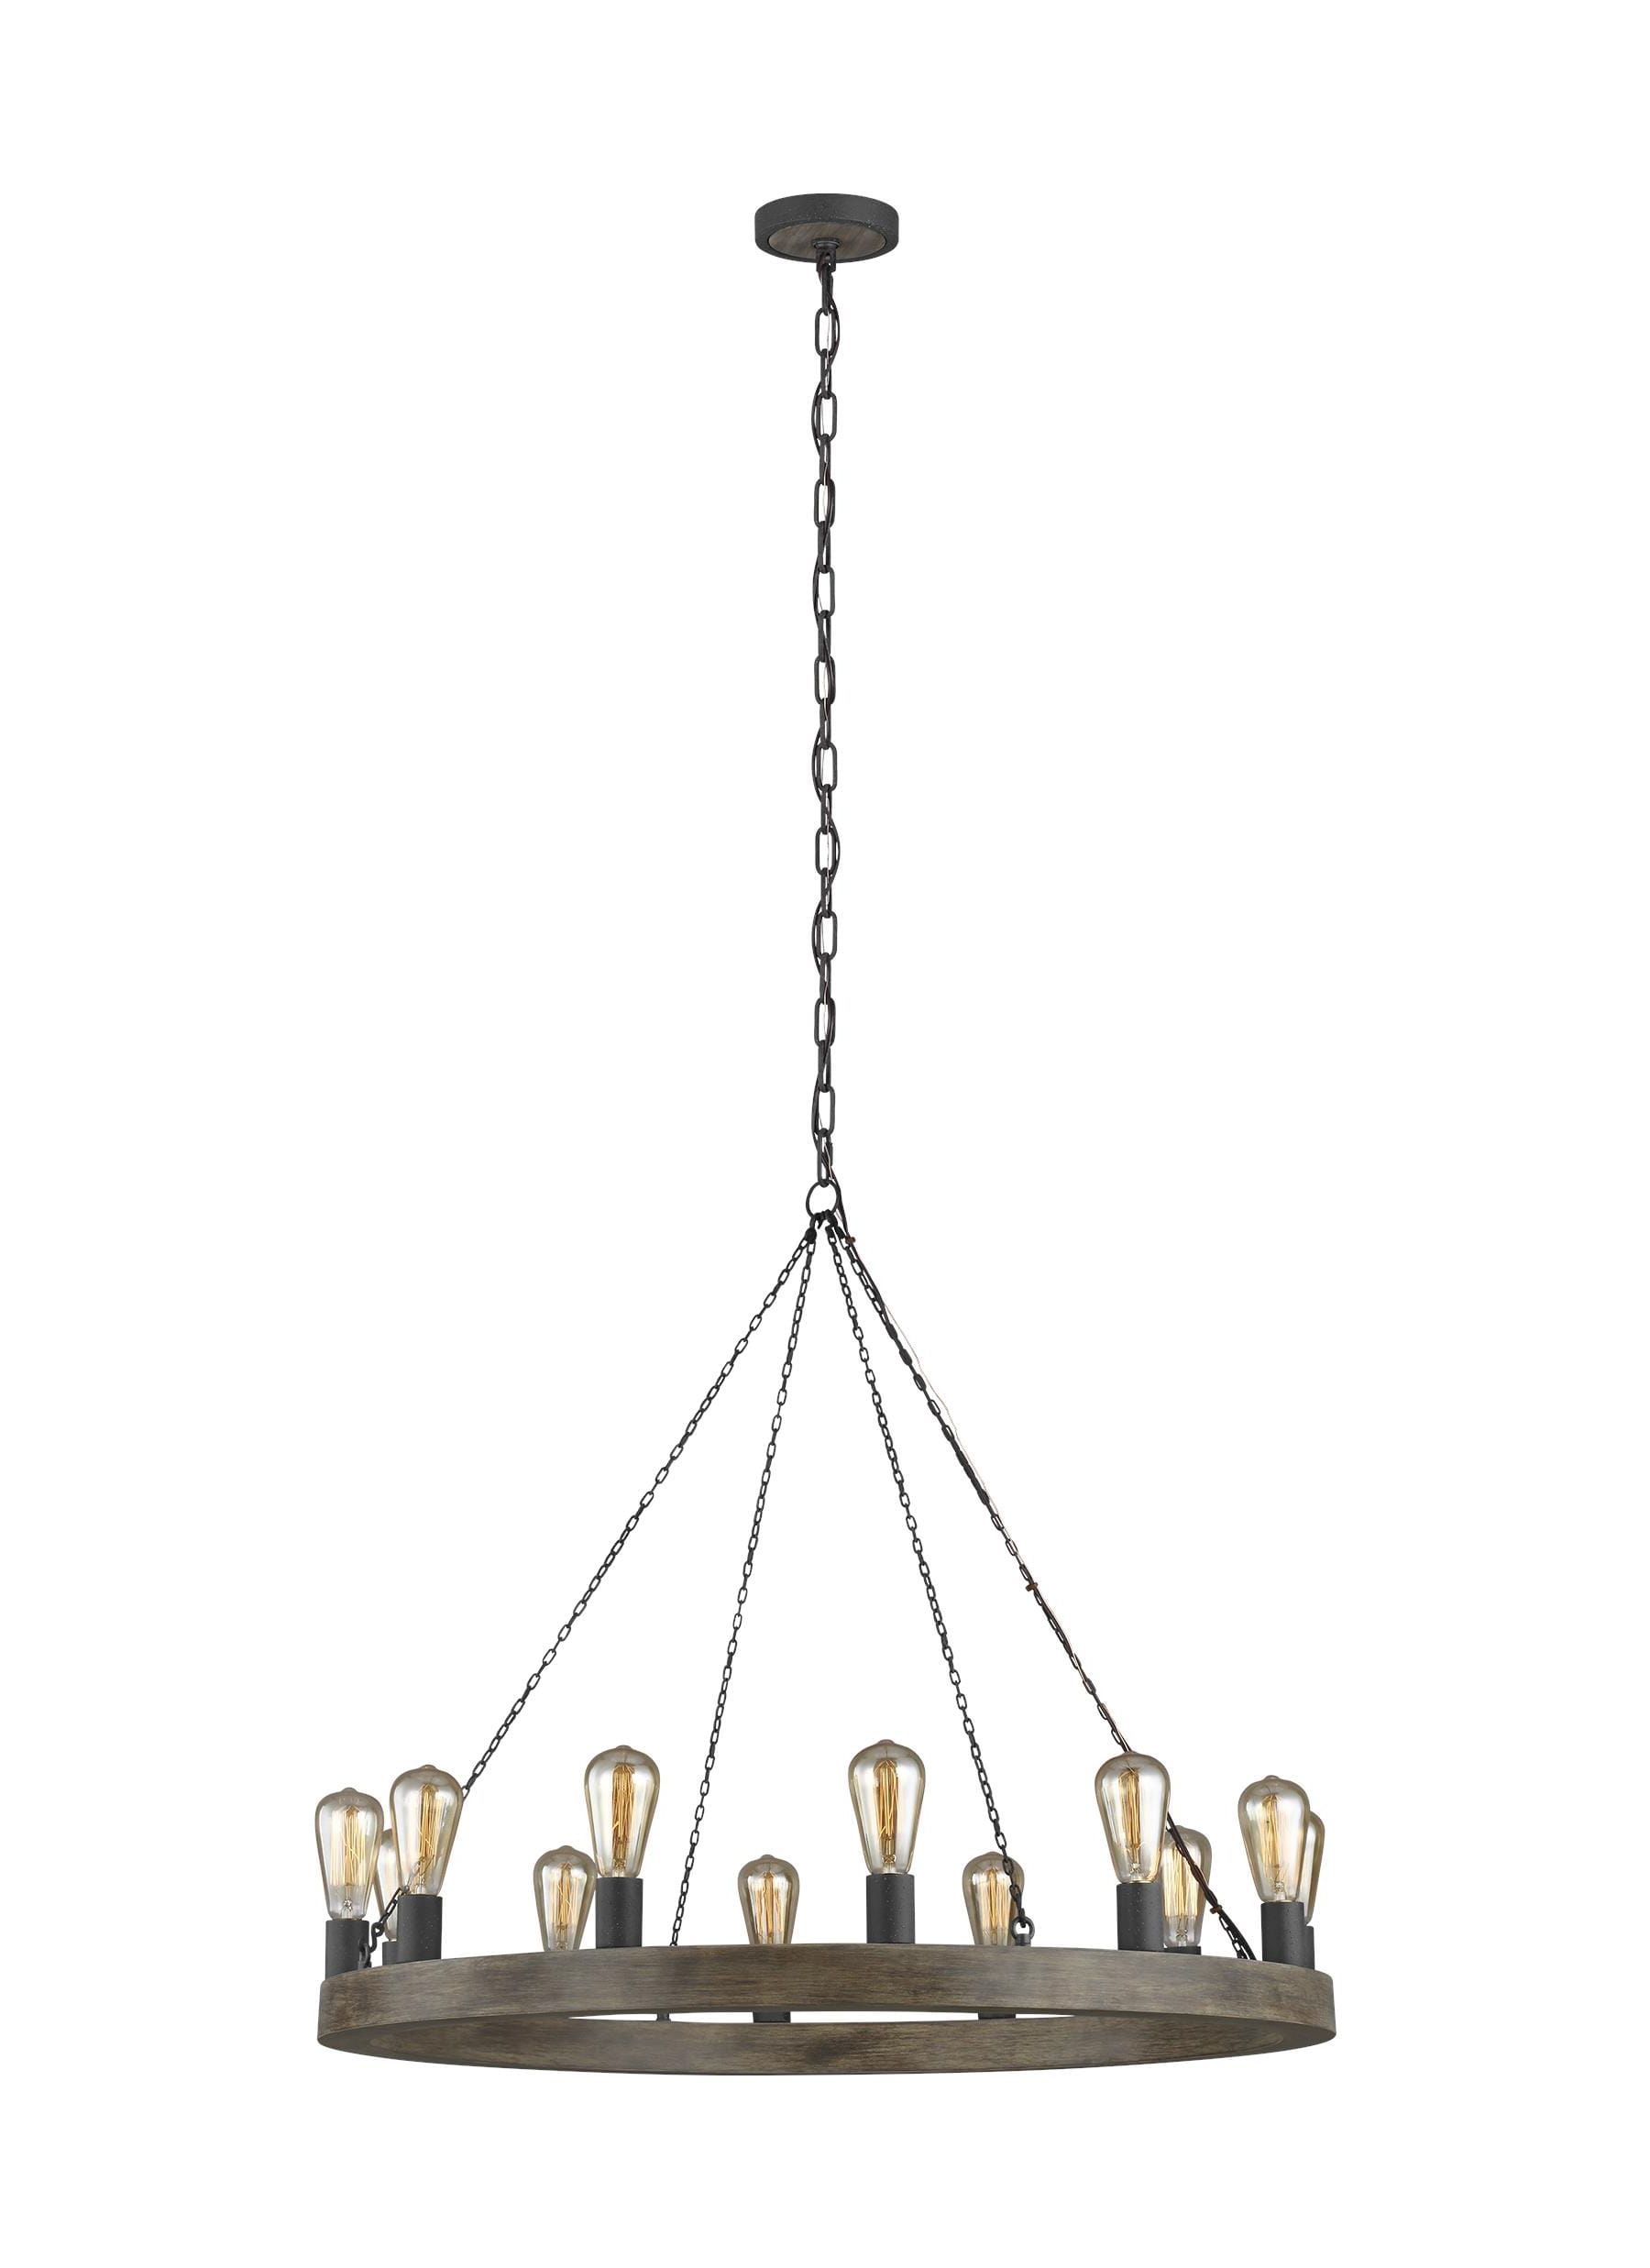 Feiss Avenir 12 Light Medium Chandelier In Weathered Oak With Most Up To Date Weathered Oak And Bronze Chandeliers (View 8 of 20)